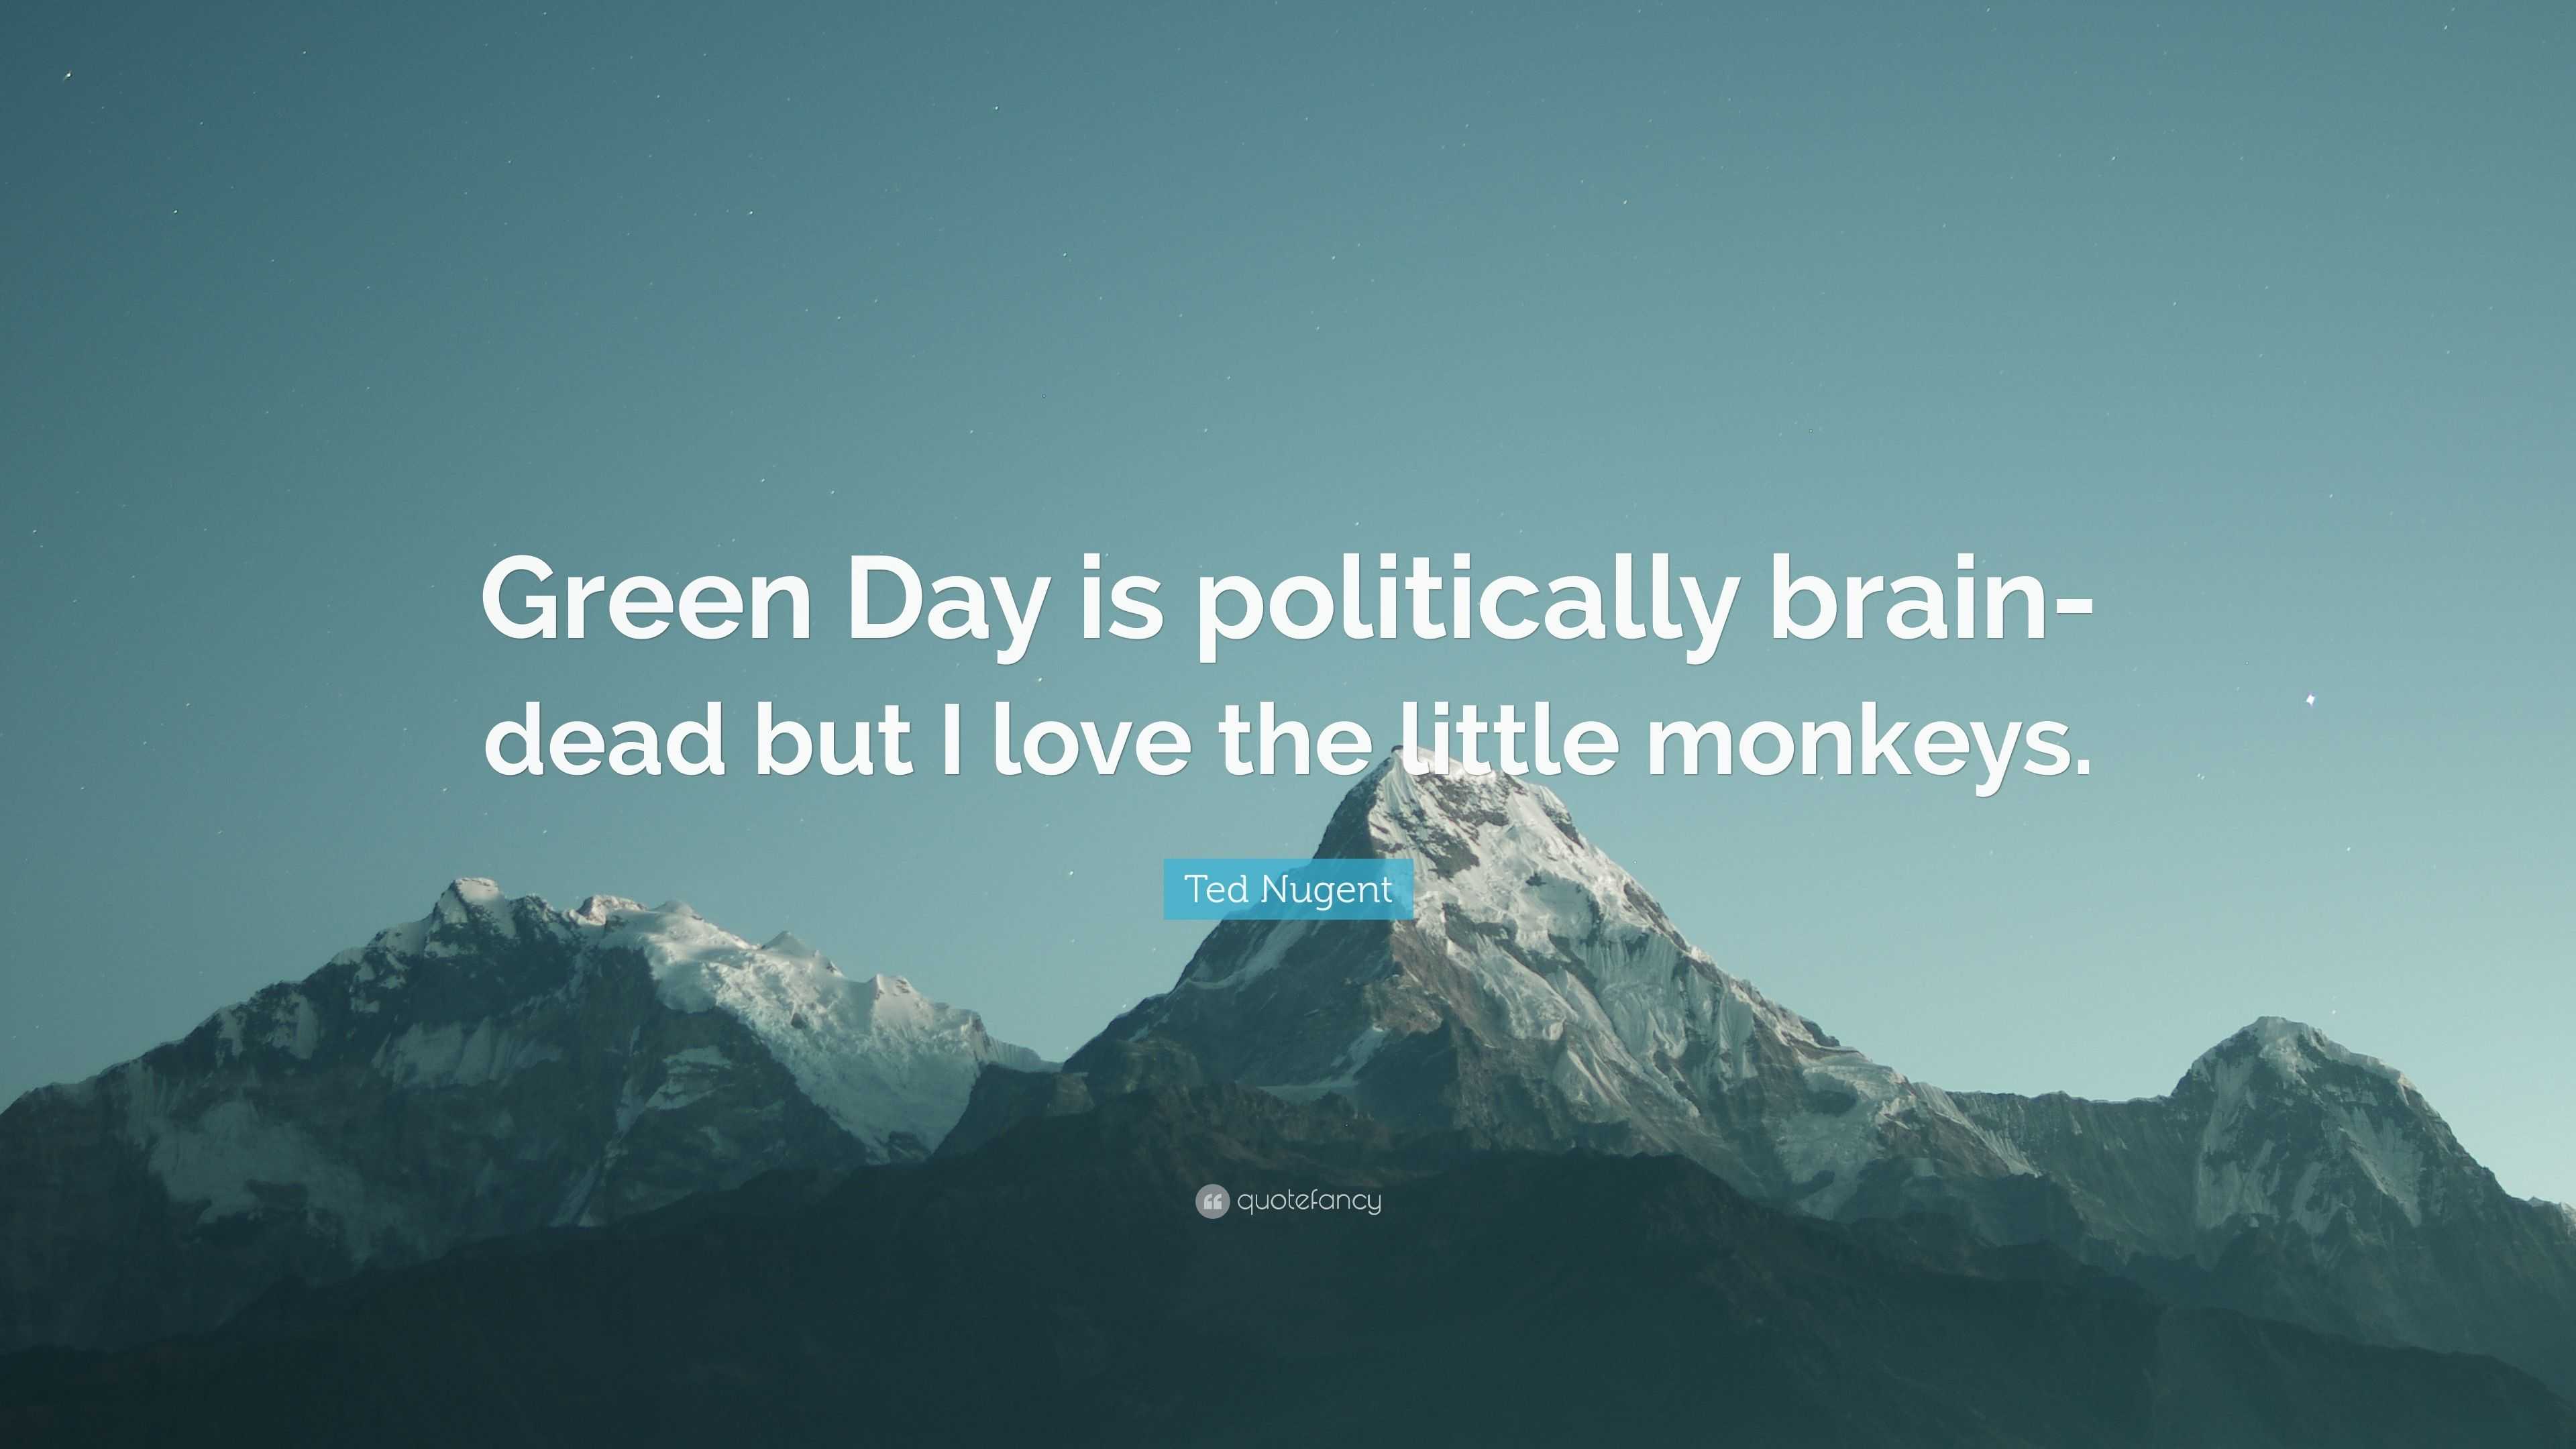 Ted Nugent Quote “Green Day is politically brain dead but I love the